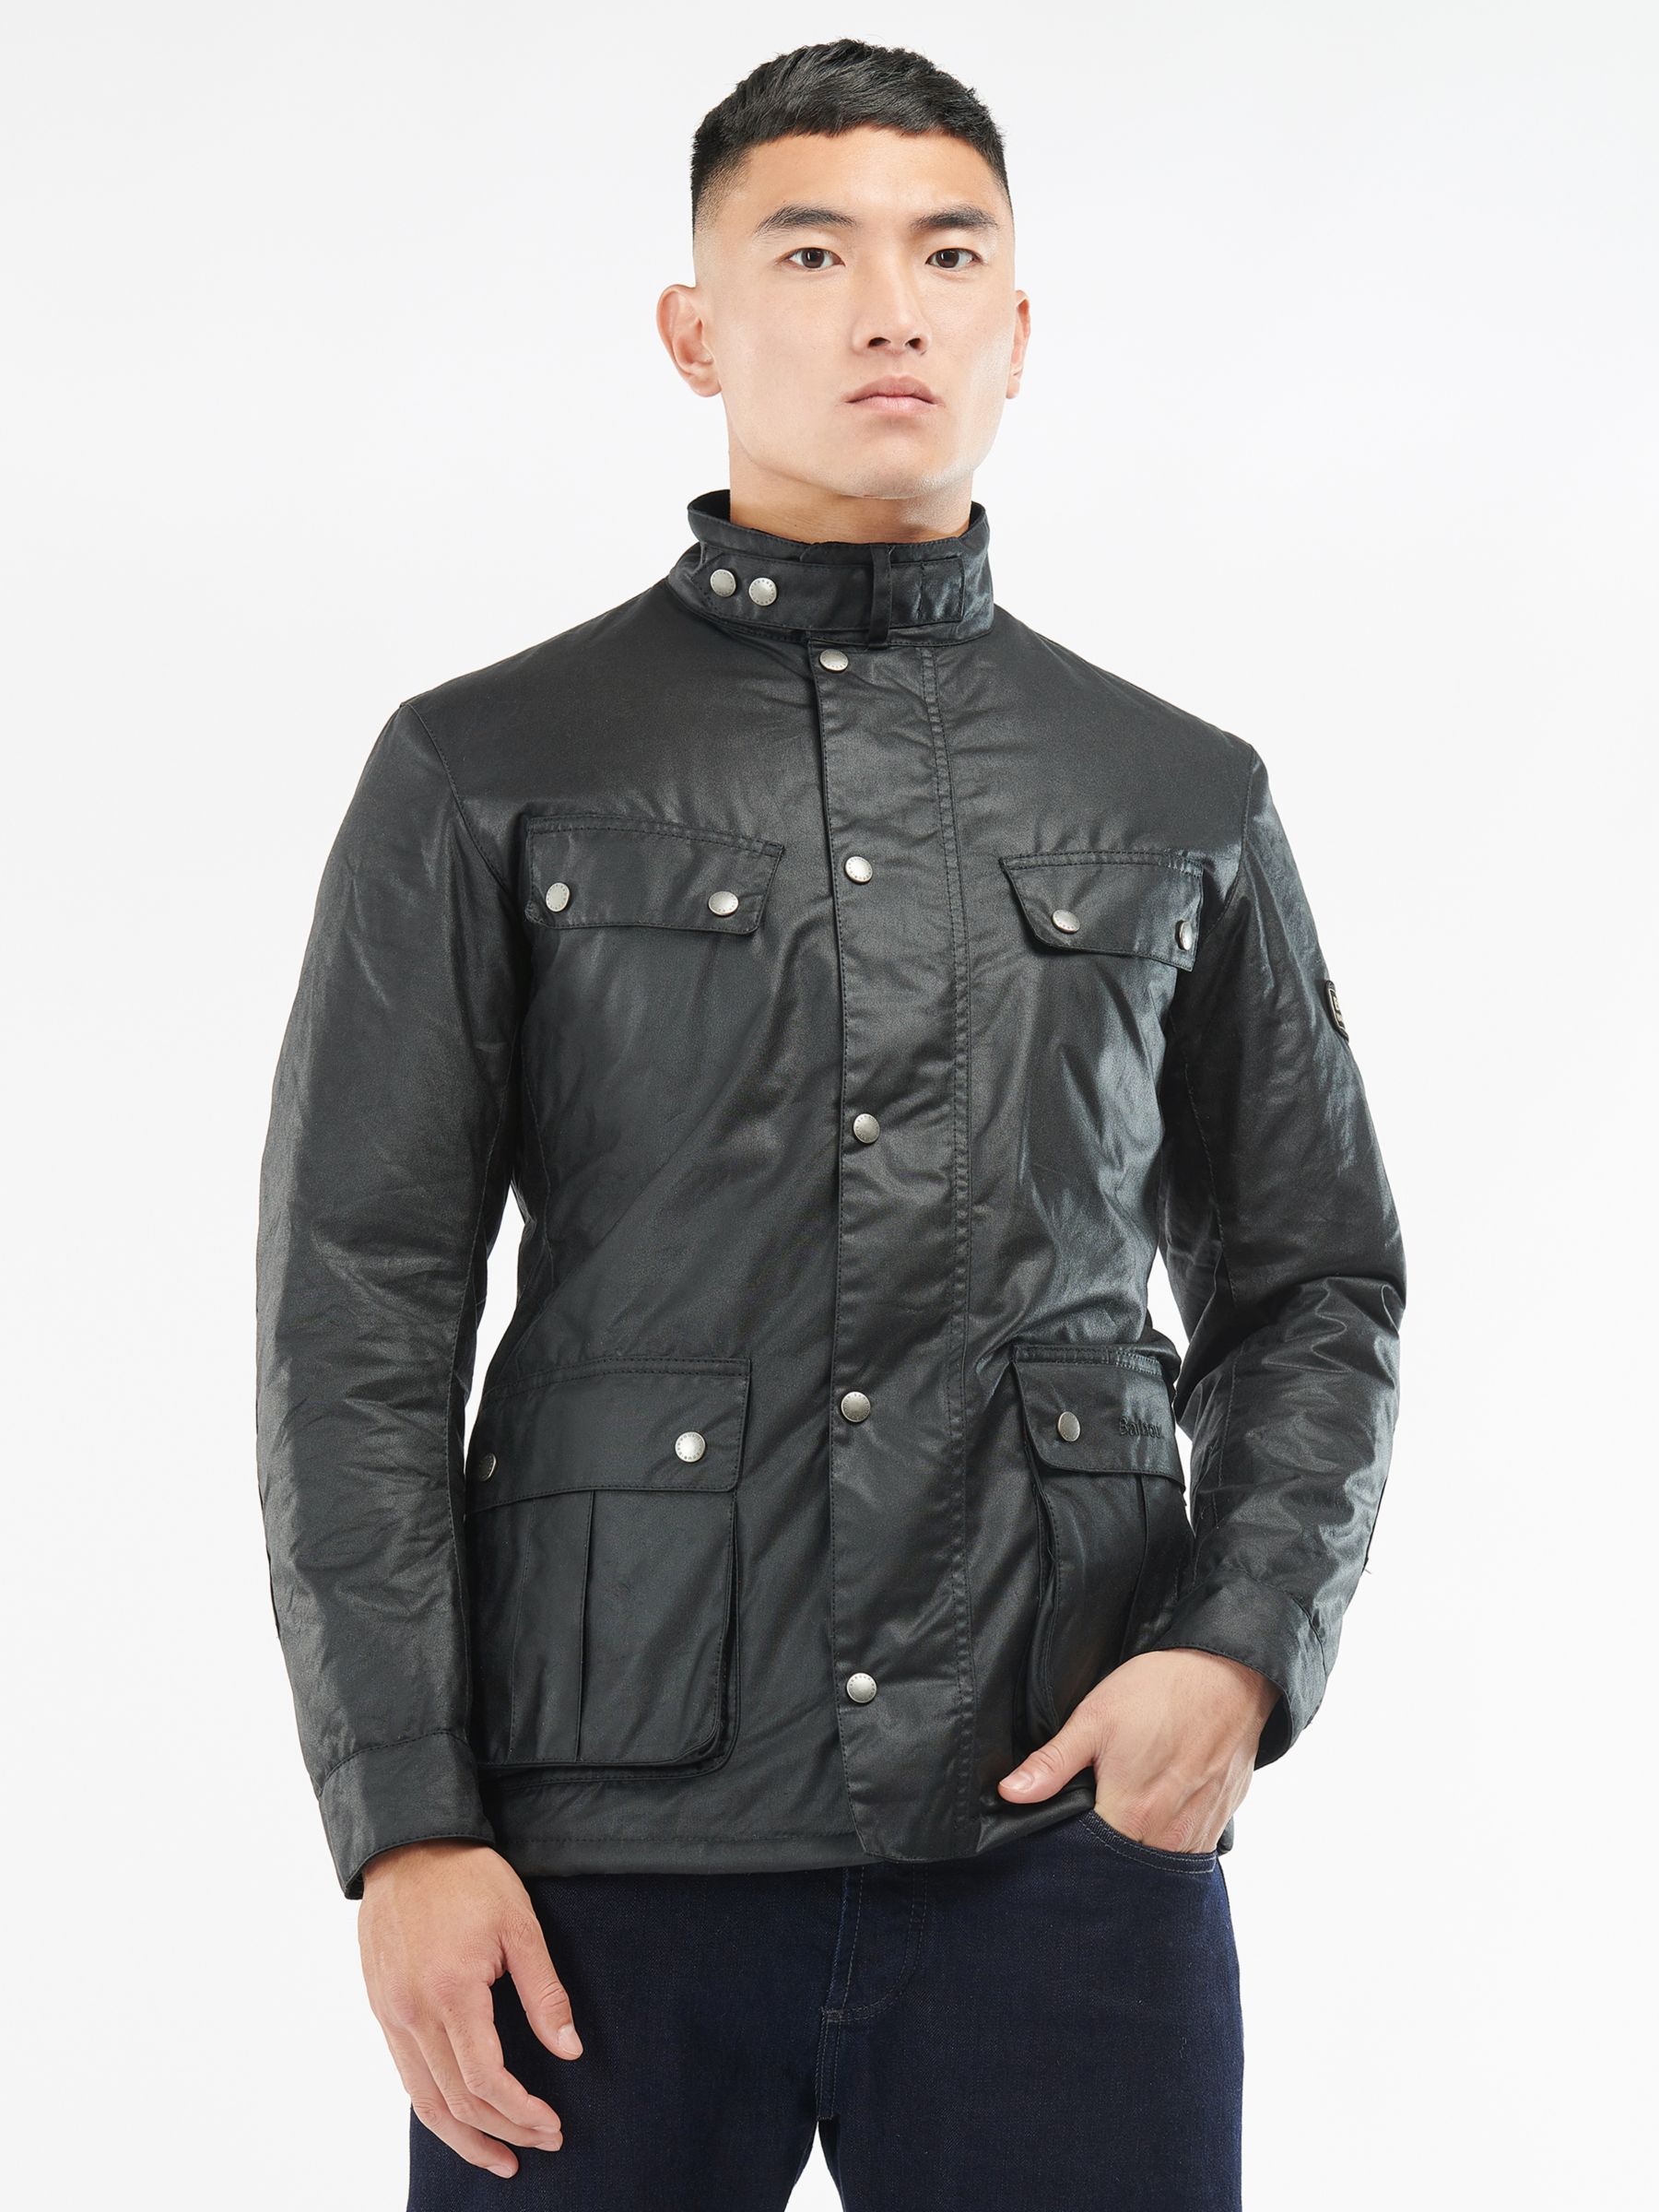 Barbour Wax Motorcycle Jacket | vlr.eng.br